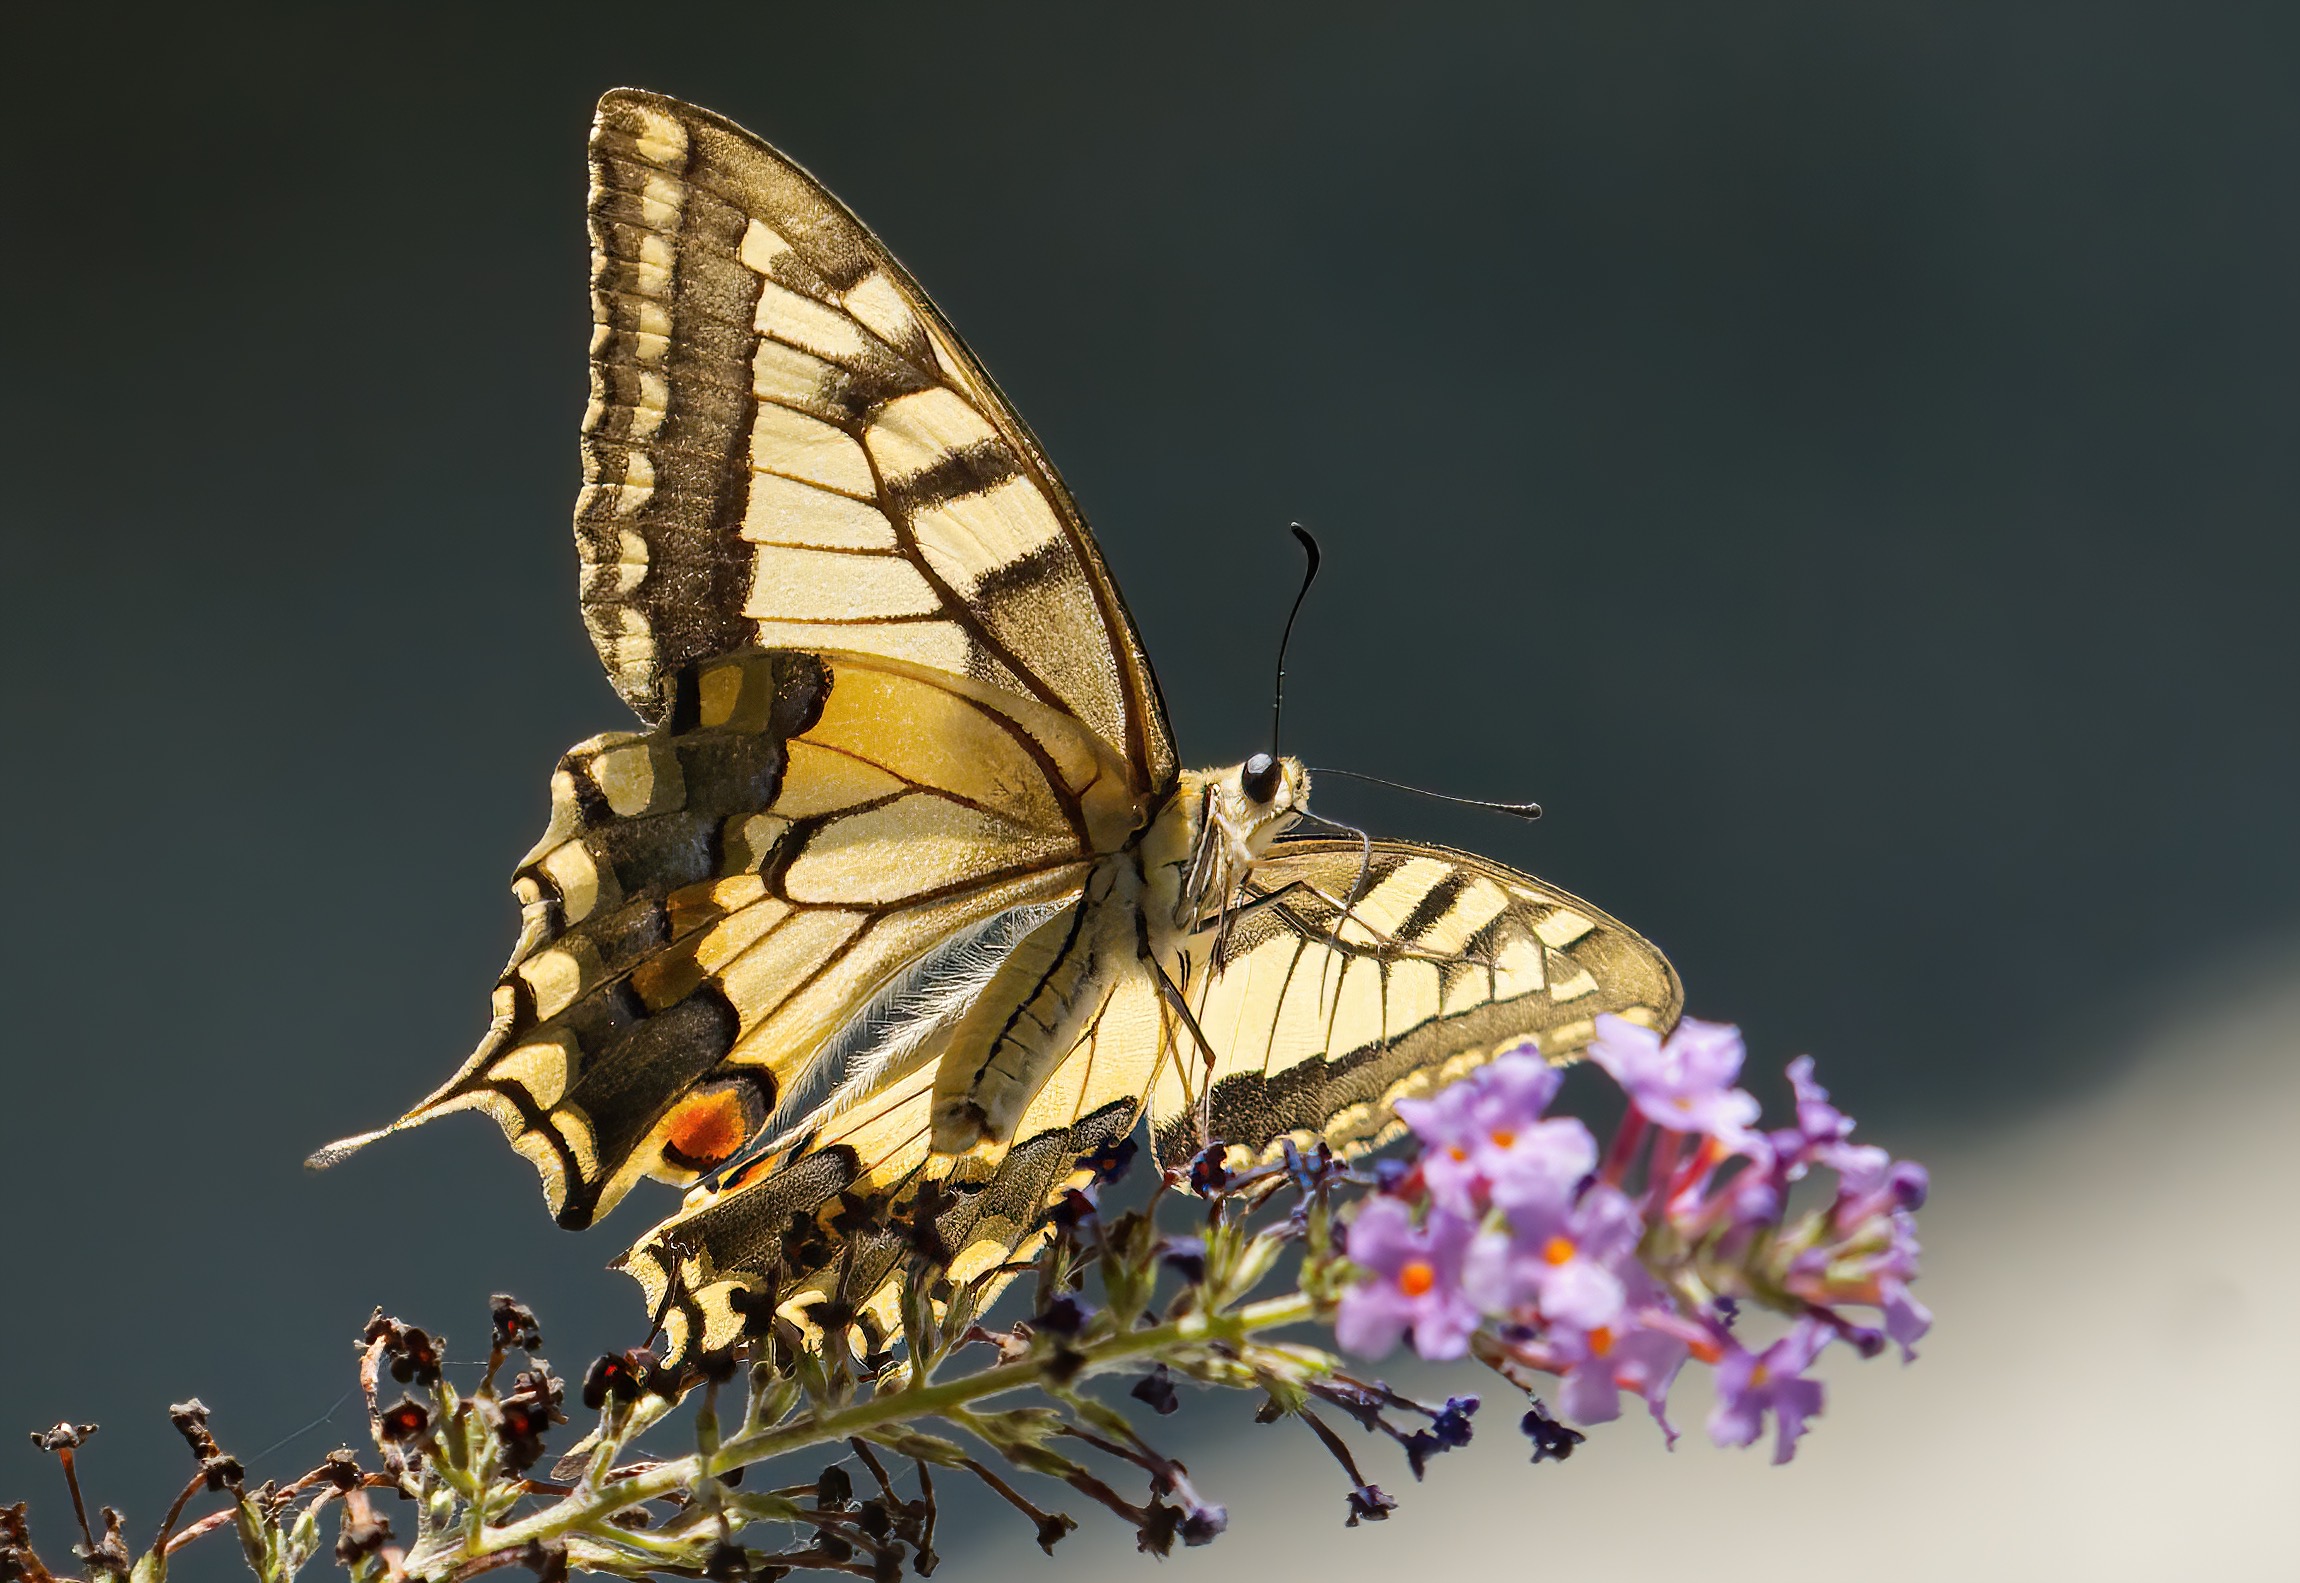 The charm of the swallowtail...